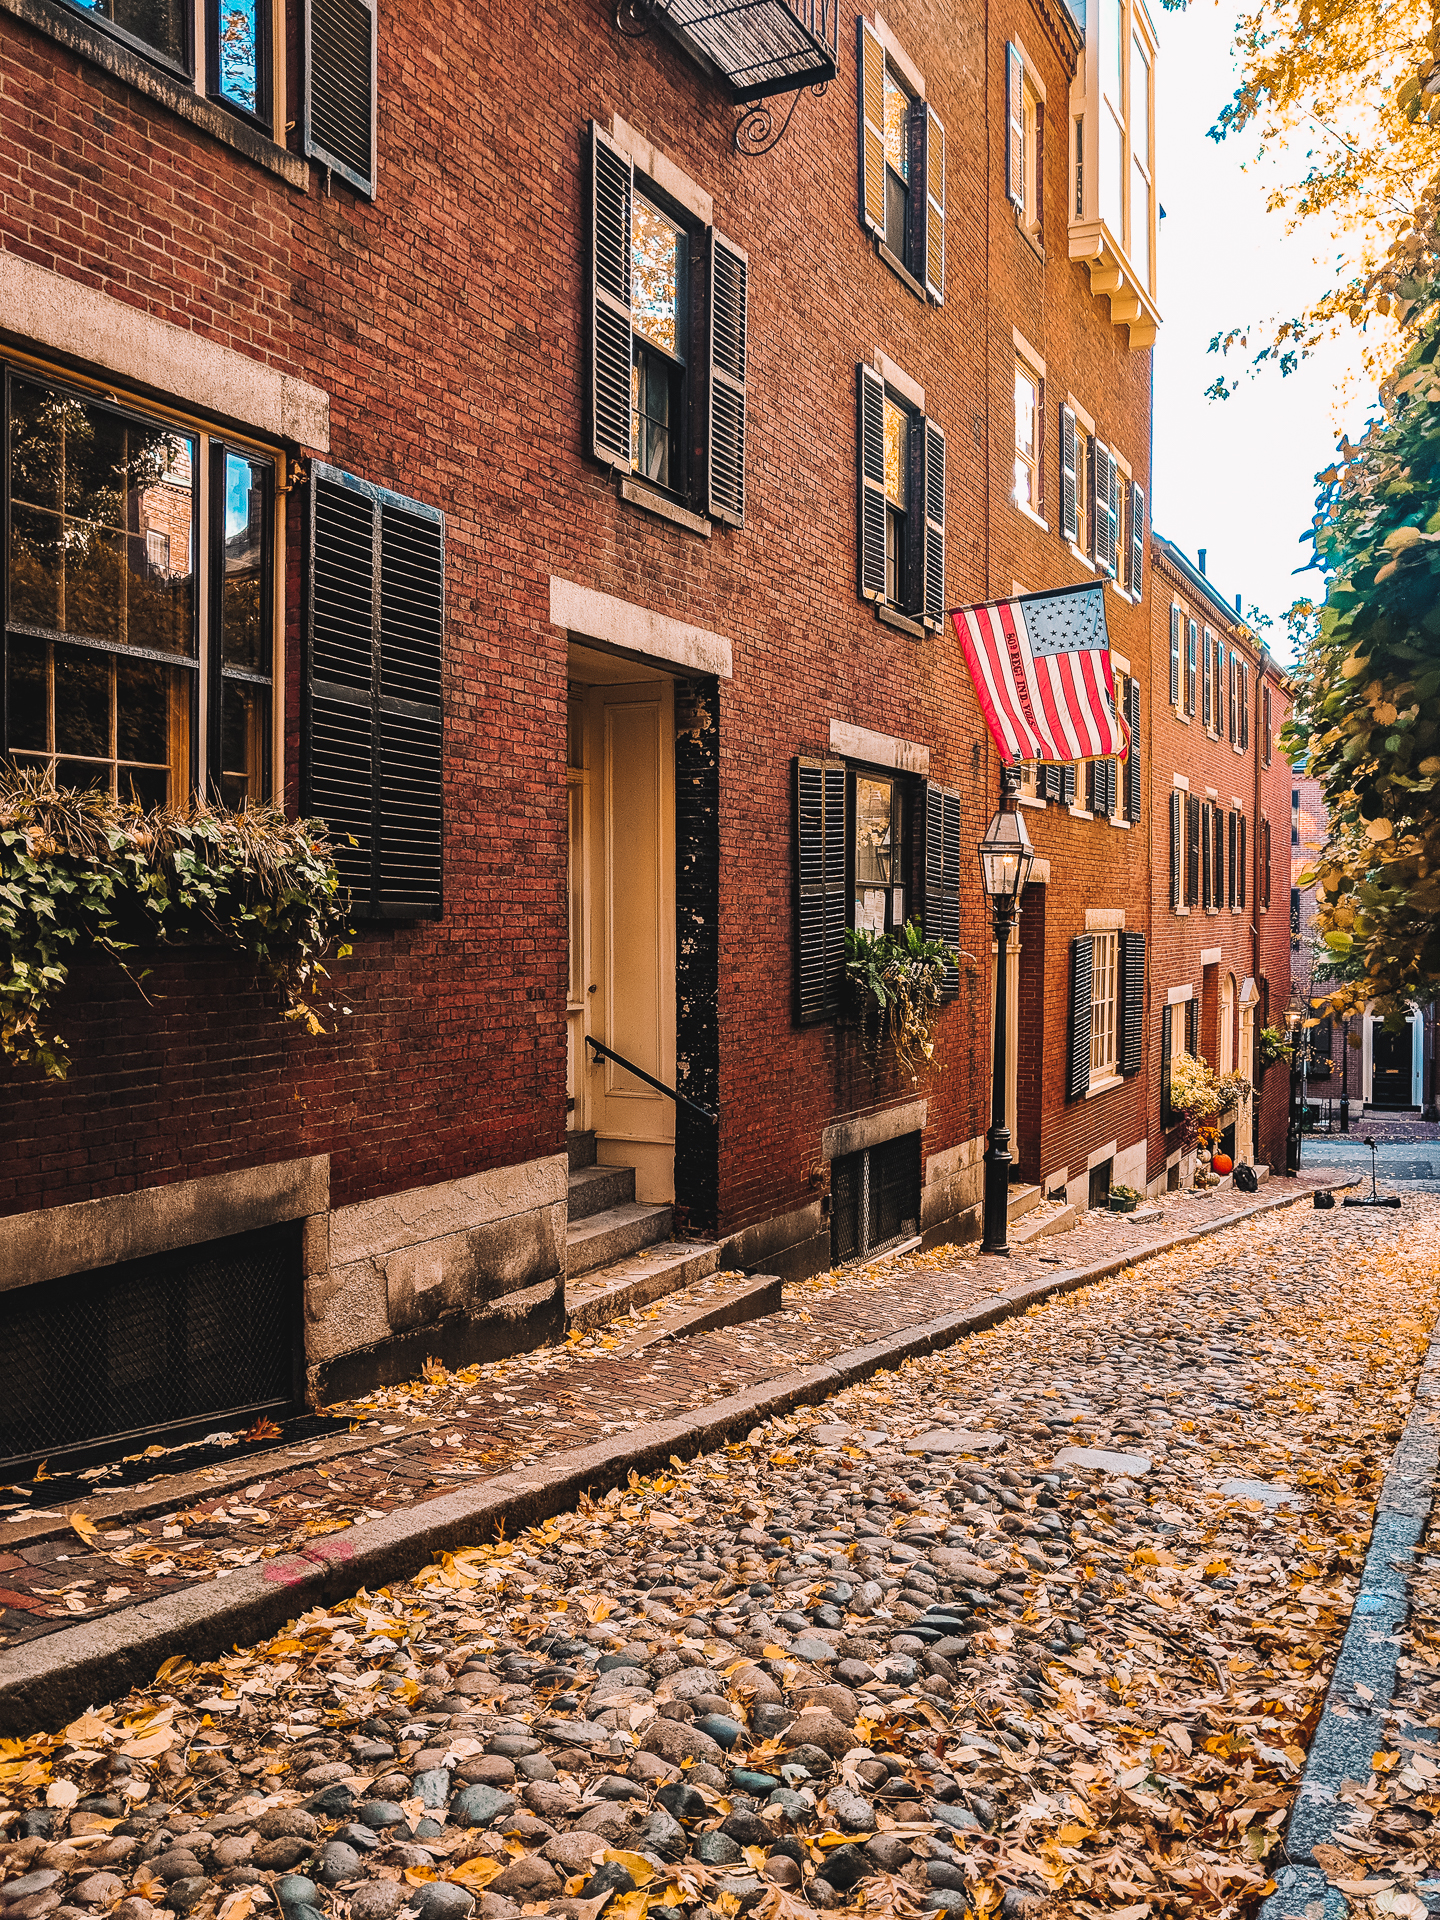 acorn street | Massachusetts |A New England Guide: 15 Photos Proving That Boston Fall Foliage is the Best featured by top Boston travel blog Sunny Coastlines